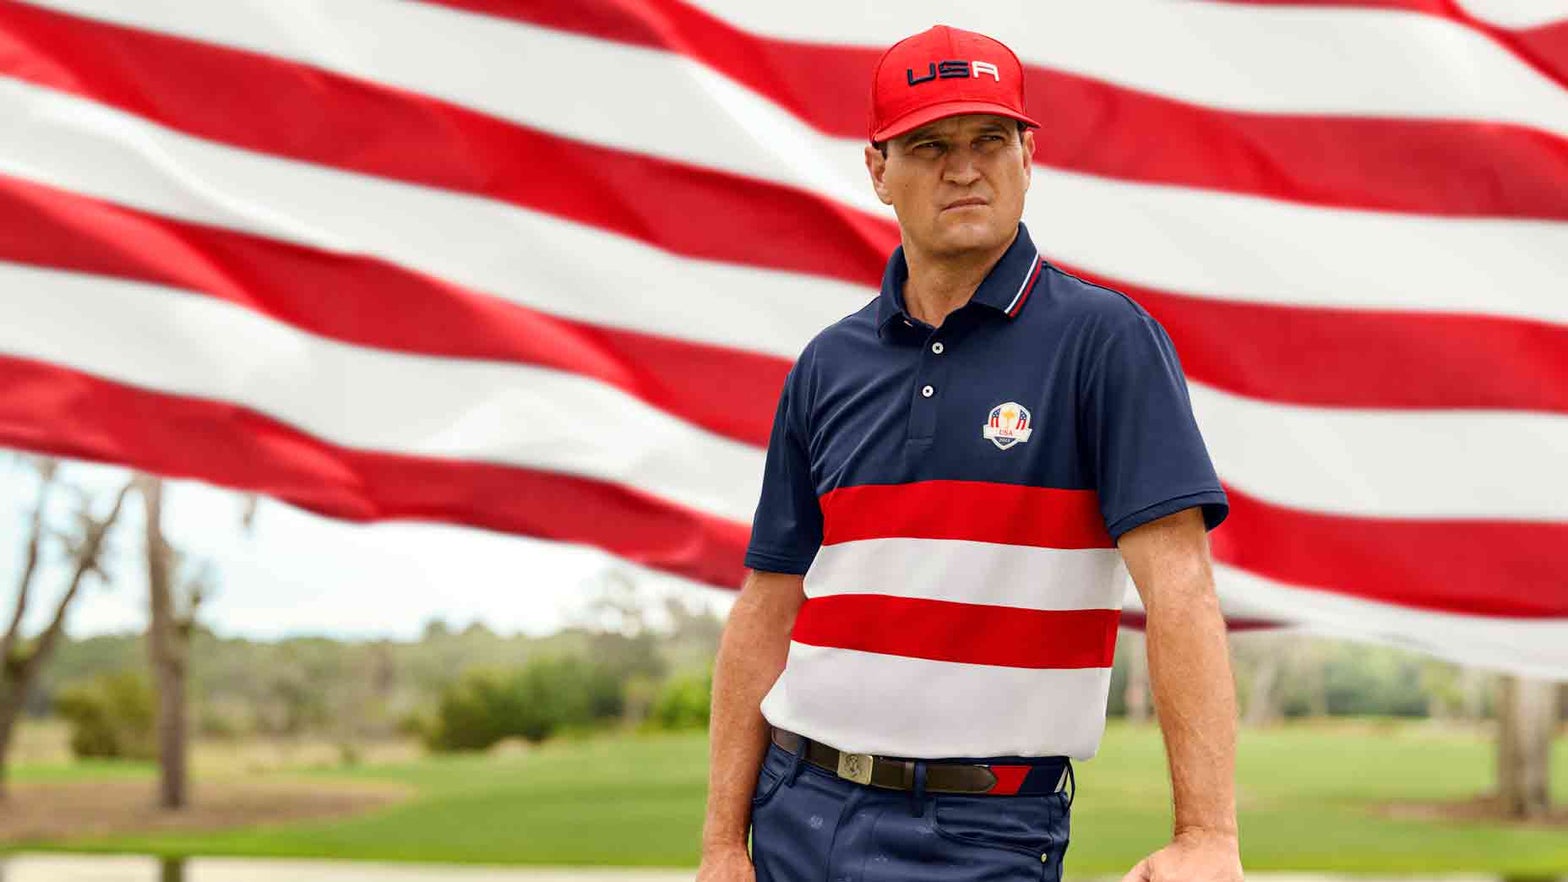 Check out U.S. Ryder Cup team's uniforms, courtesy of Ralph Lauren